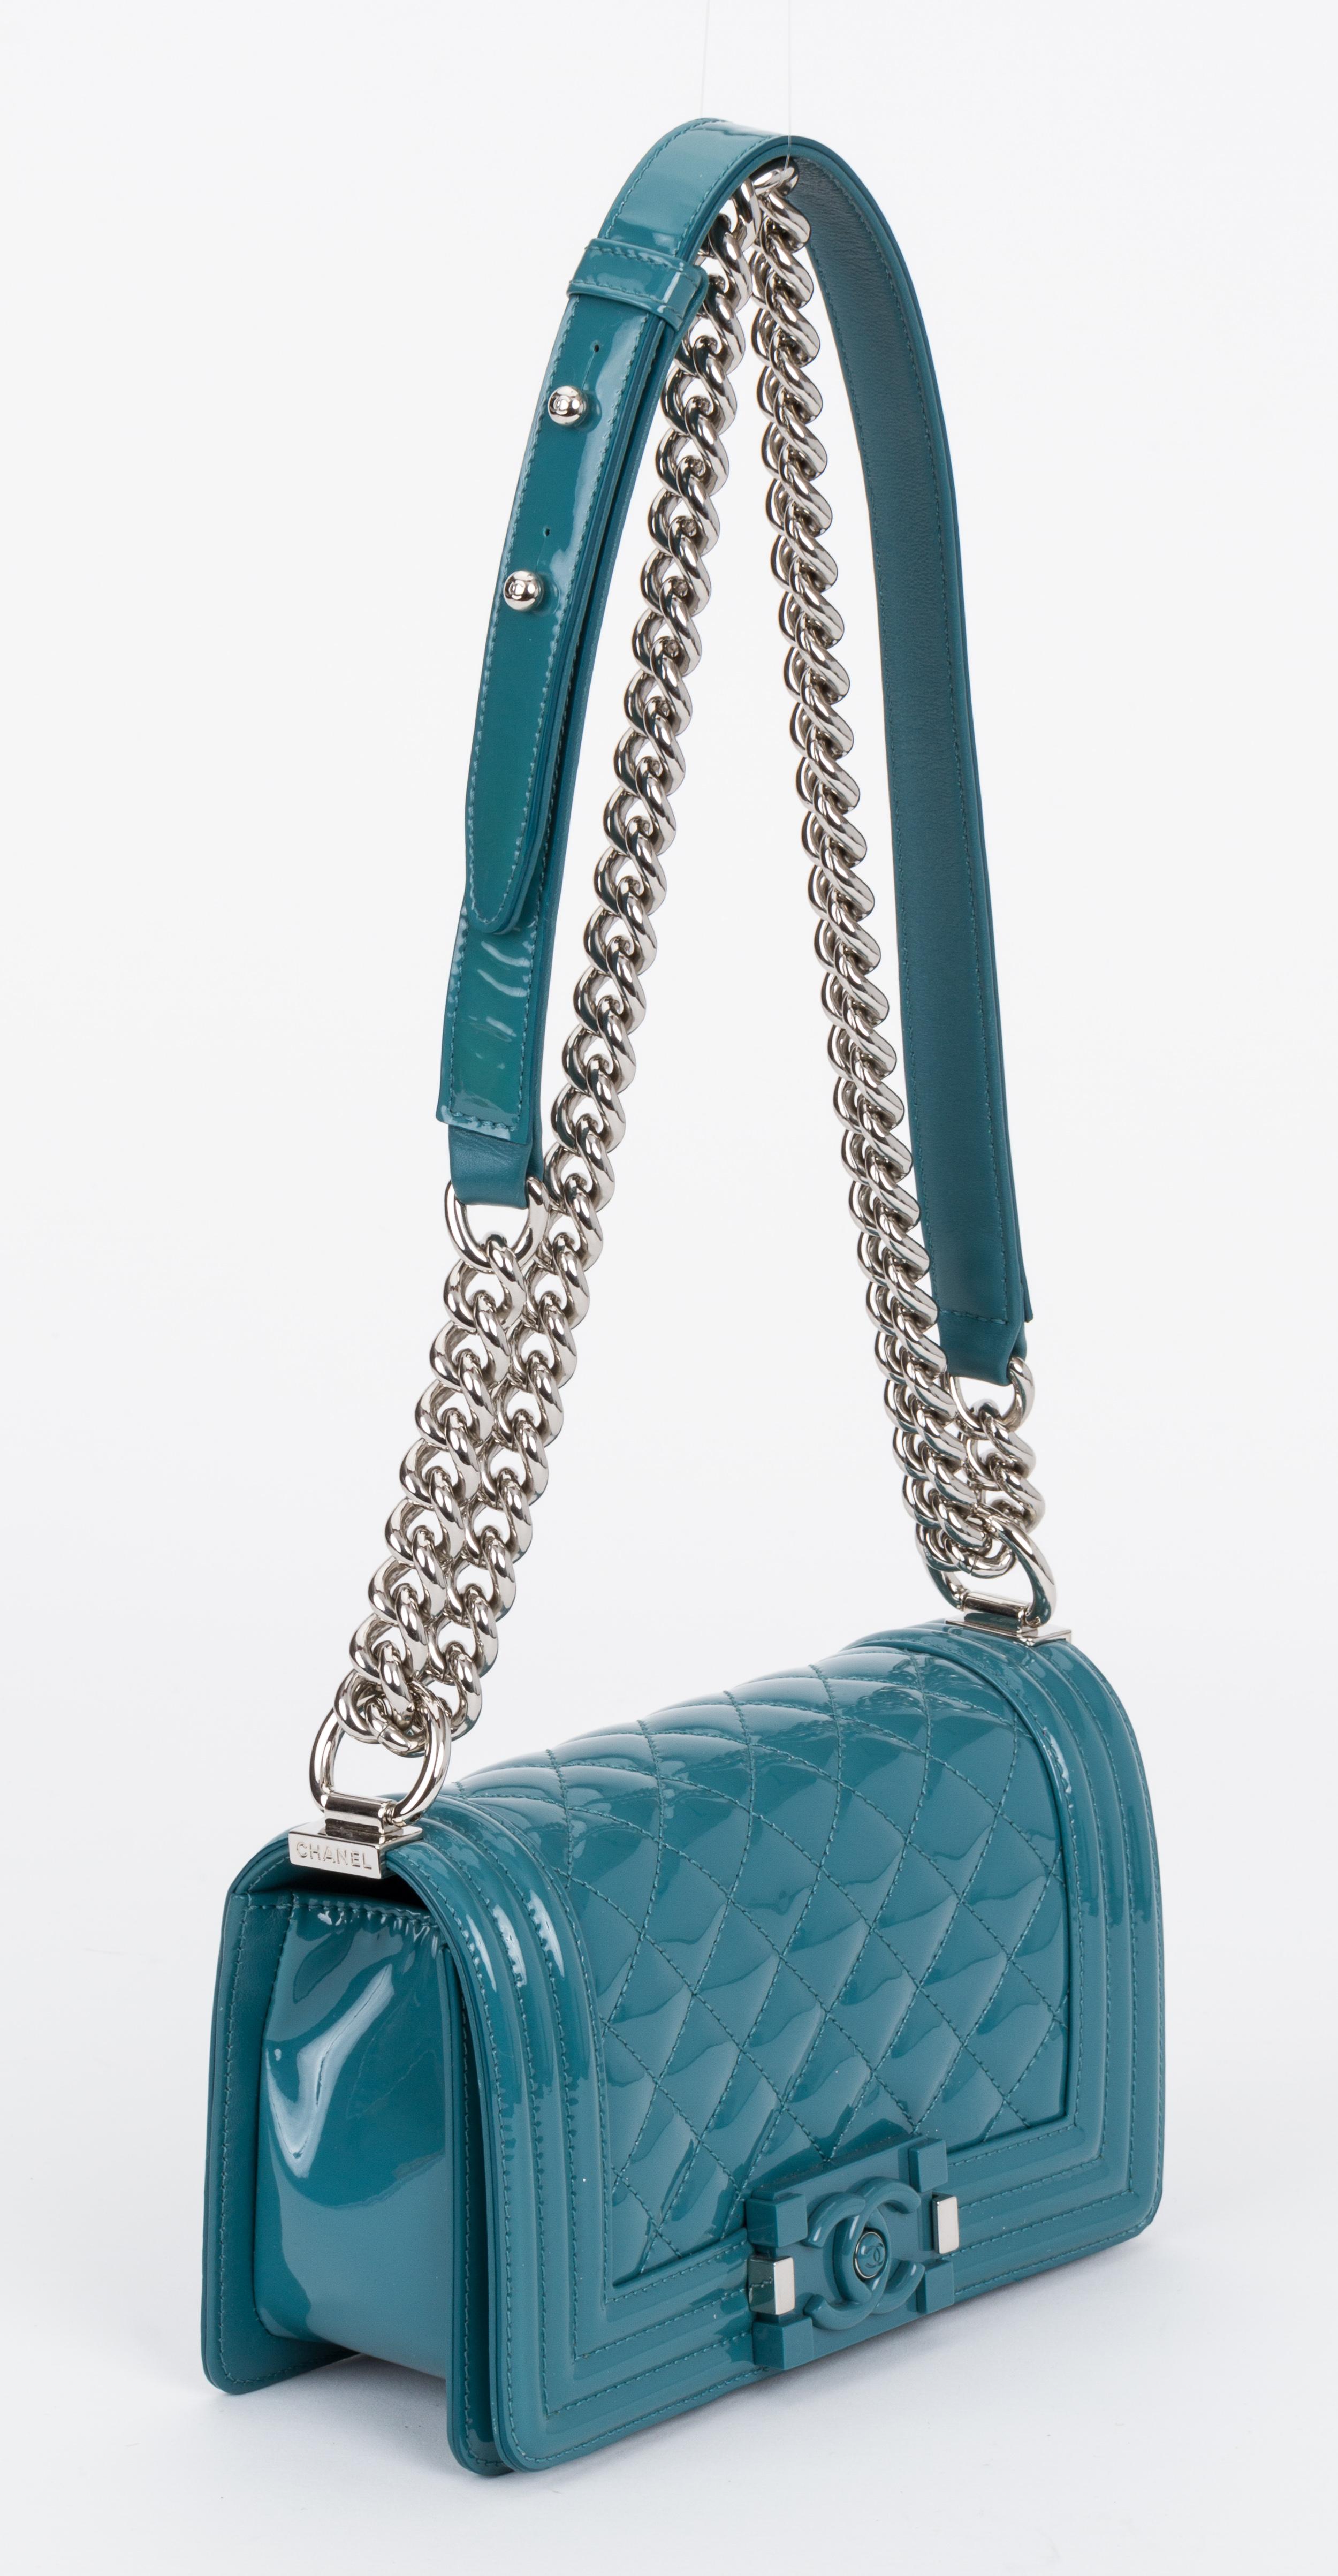 Chanel new condition small boy bag in cerulean blue patent leather and silver tone hardware. Handle drop 12